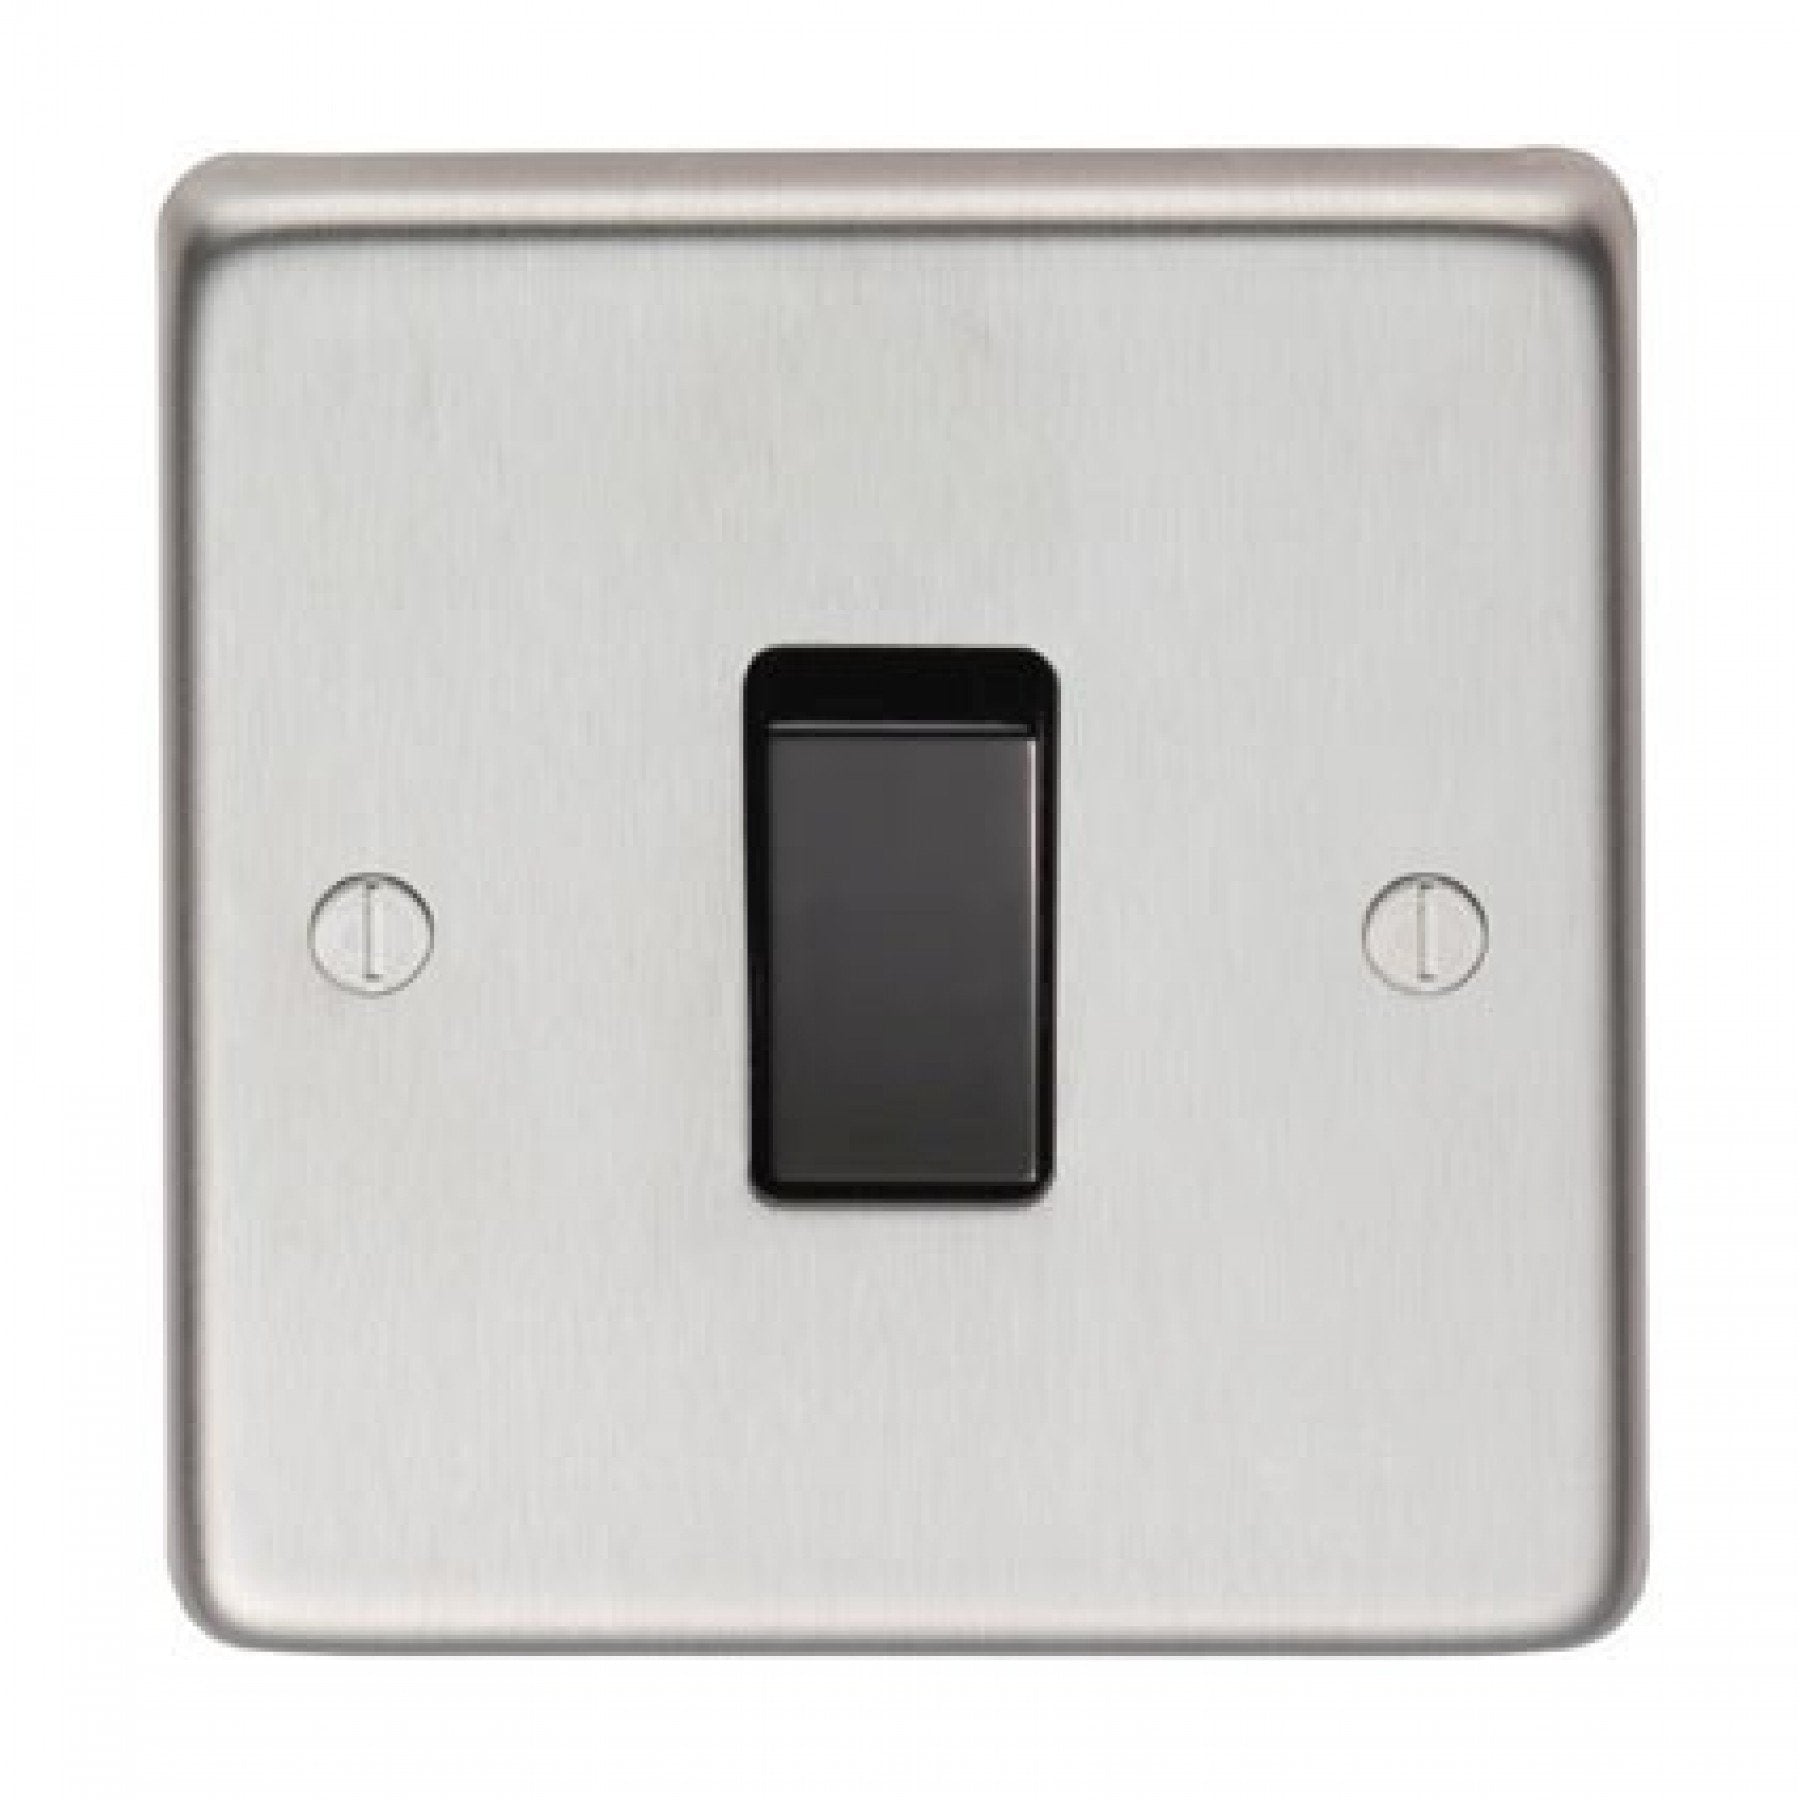 From The Anvil SSS Single 10 Amp Switch - No.42 Interiors